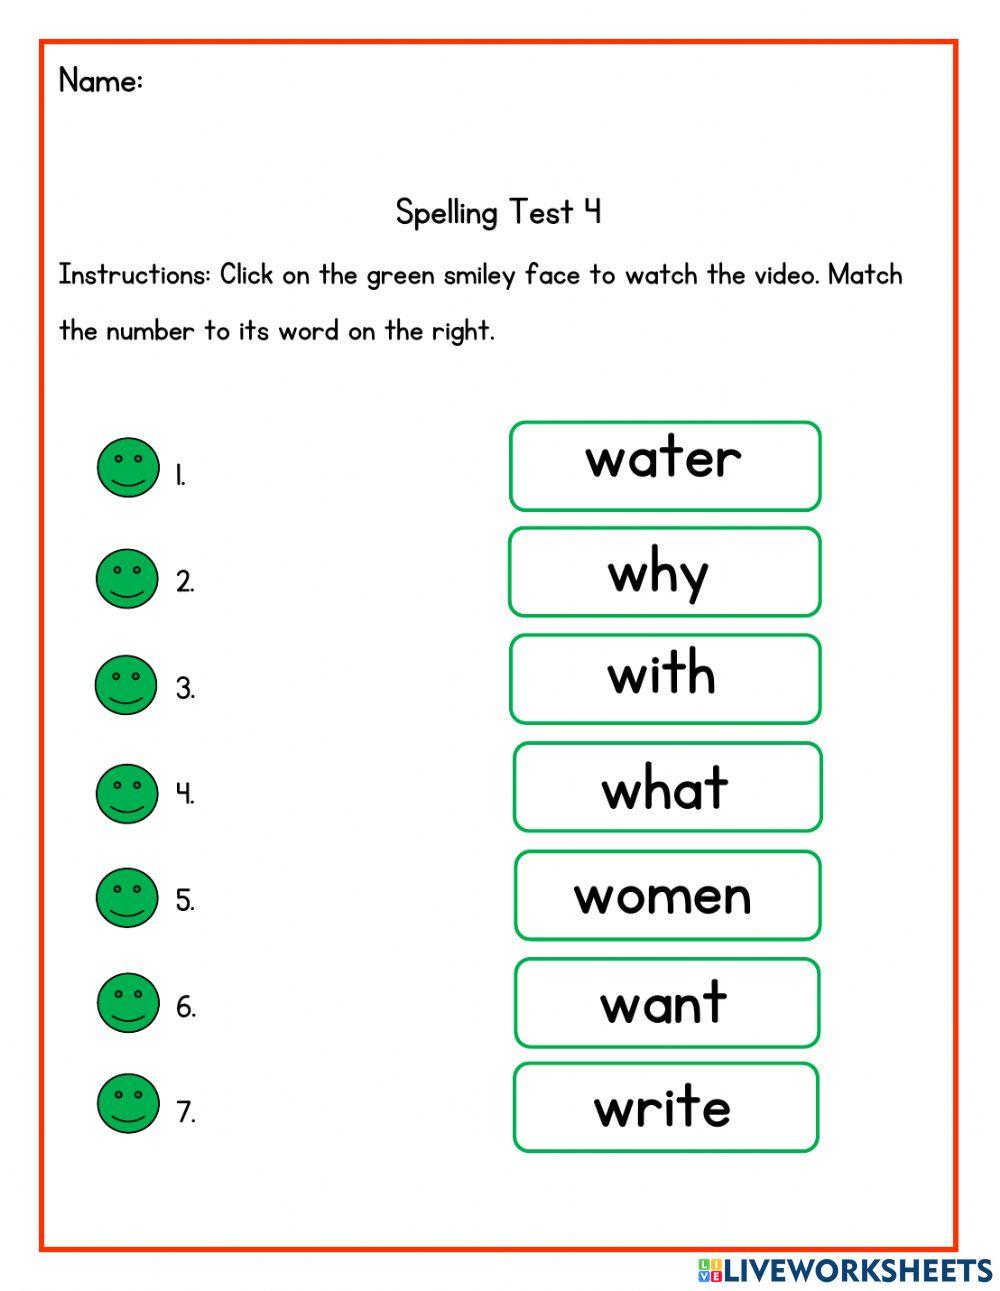 Spelling Tests- Sight words starting with 'w'